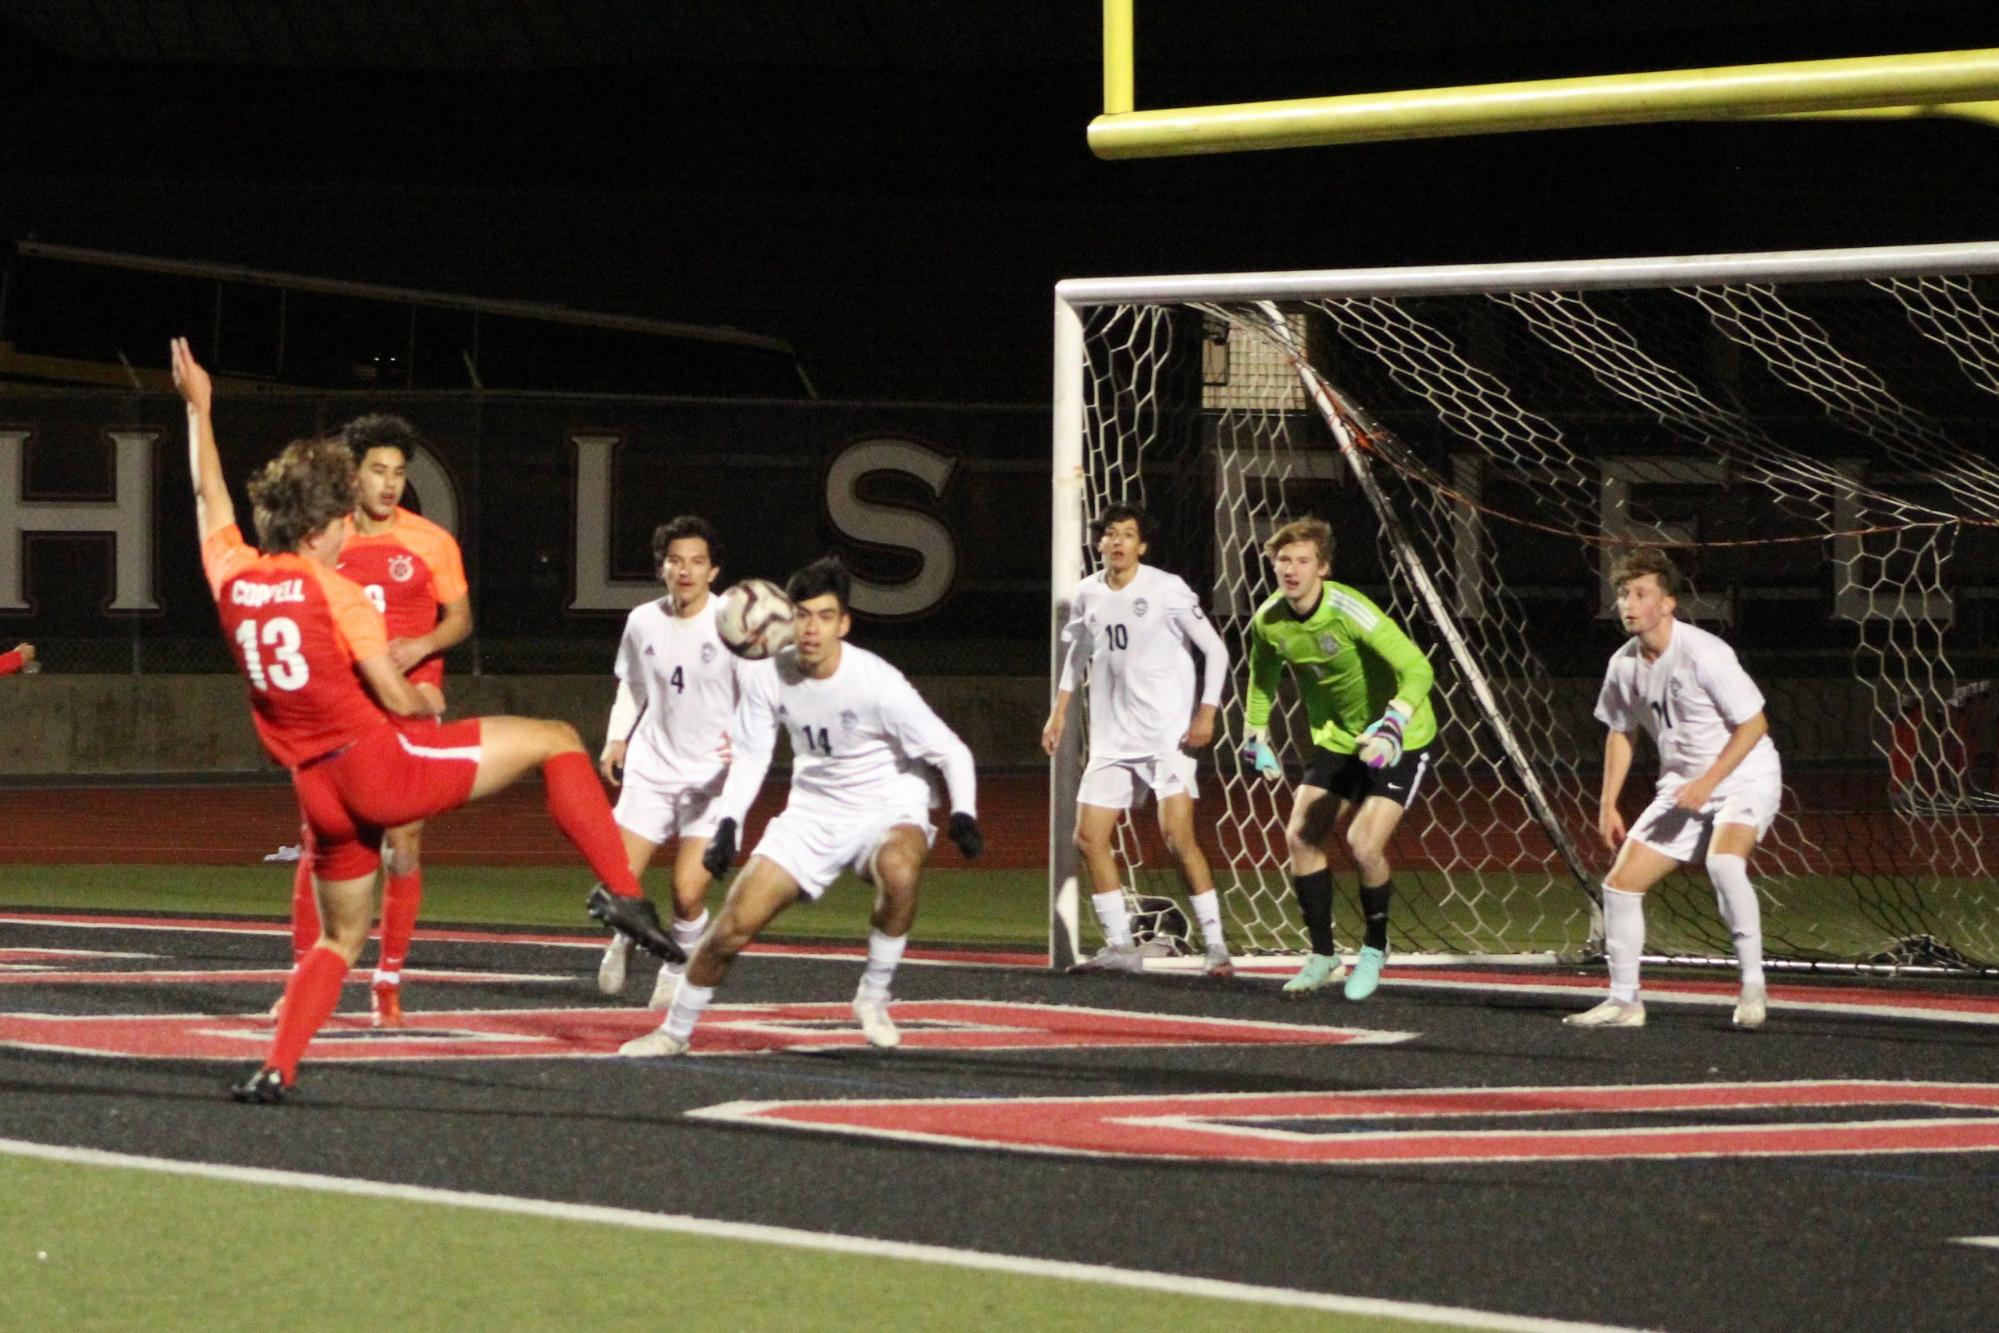 Coppell suffers a 3-2 defeat by Flower Mound; Morris stresses air ball control